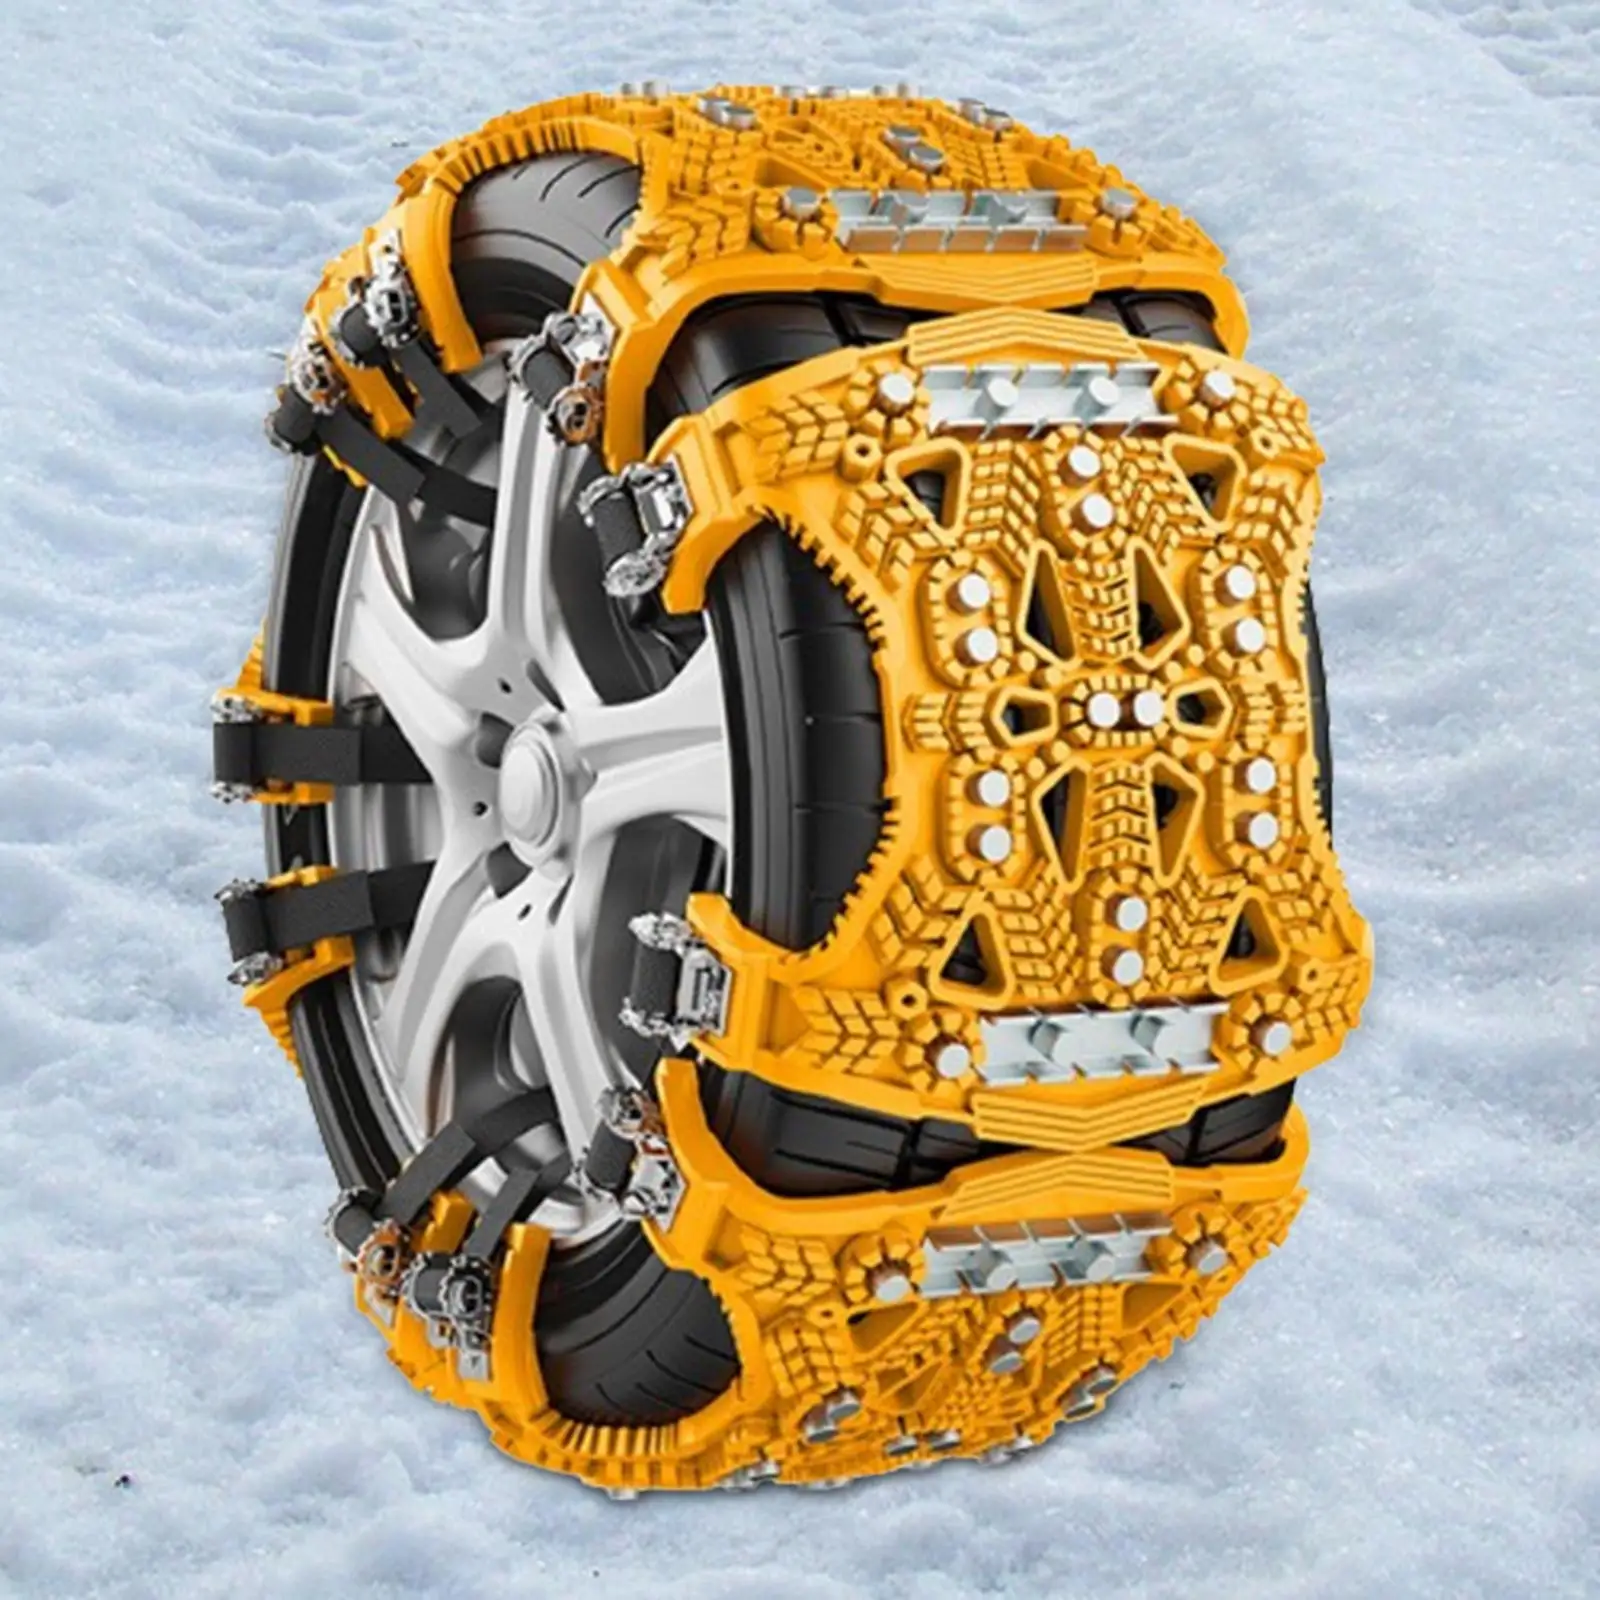 Car Tyres Anti Slip Snow Chain Portable for Emergency Traction Sturdy